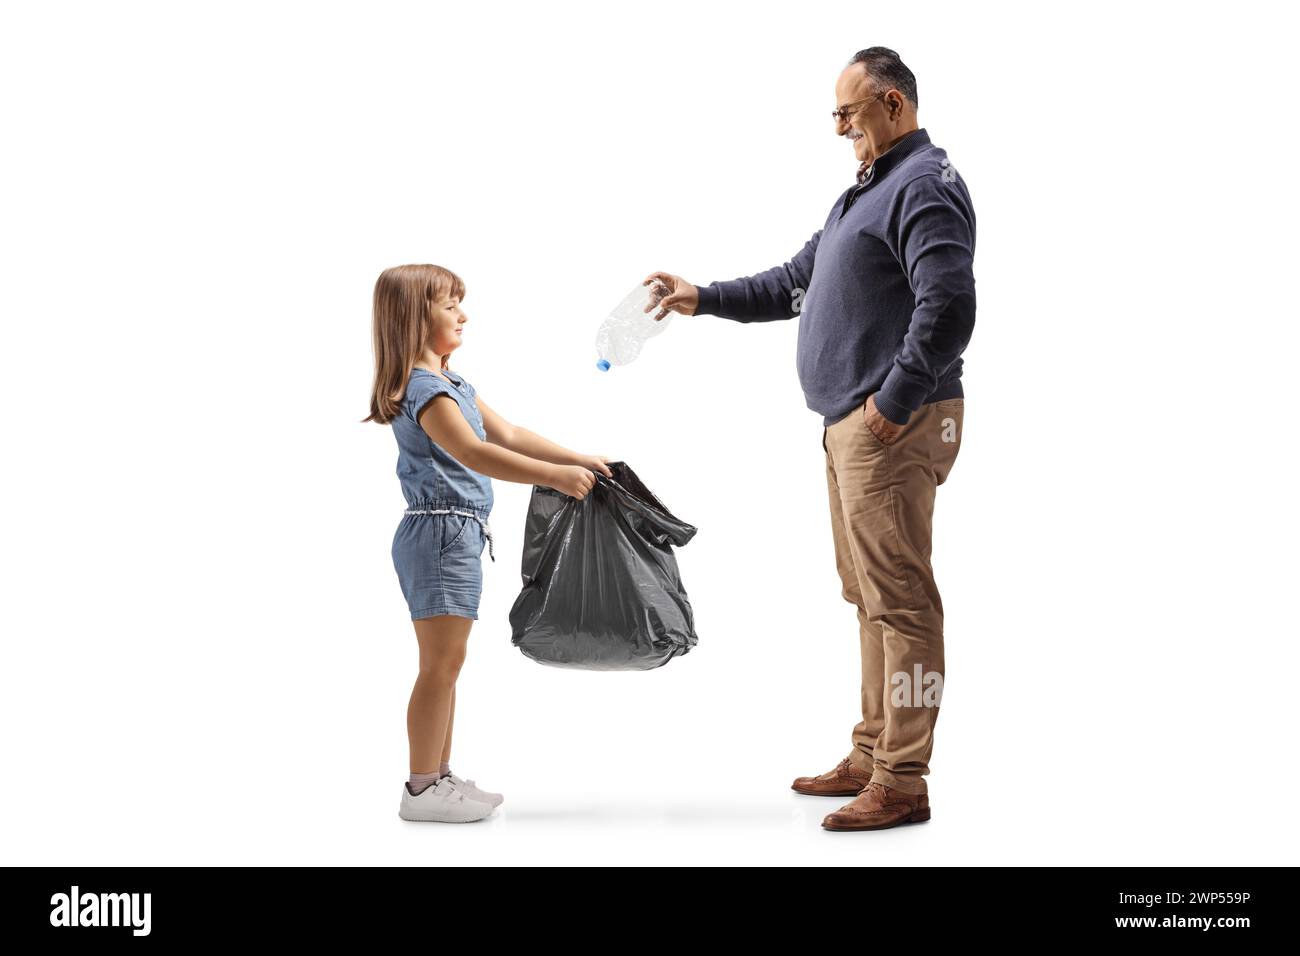 Little girl holding a plastic waste bag and man throwing a bottle isolated on white background Stock Photo